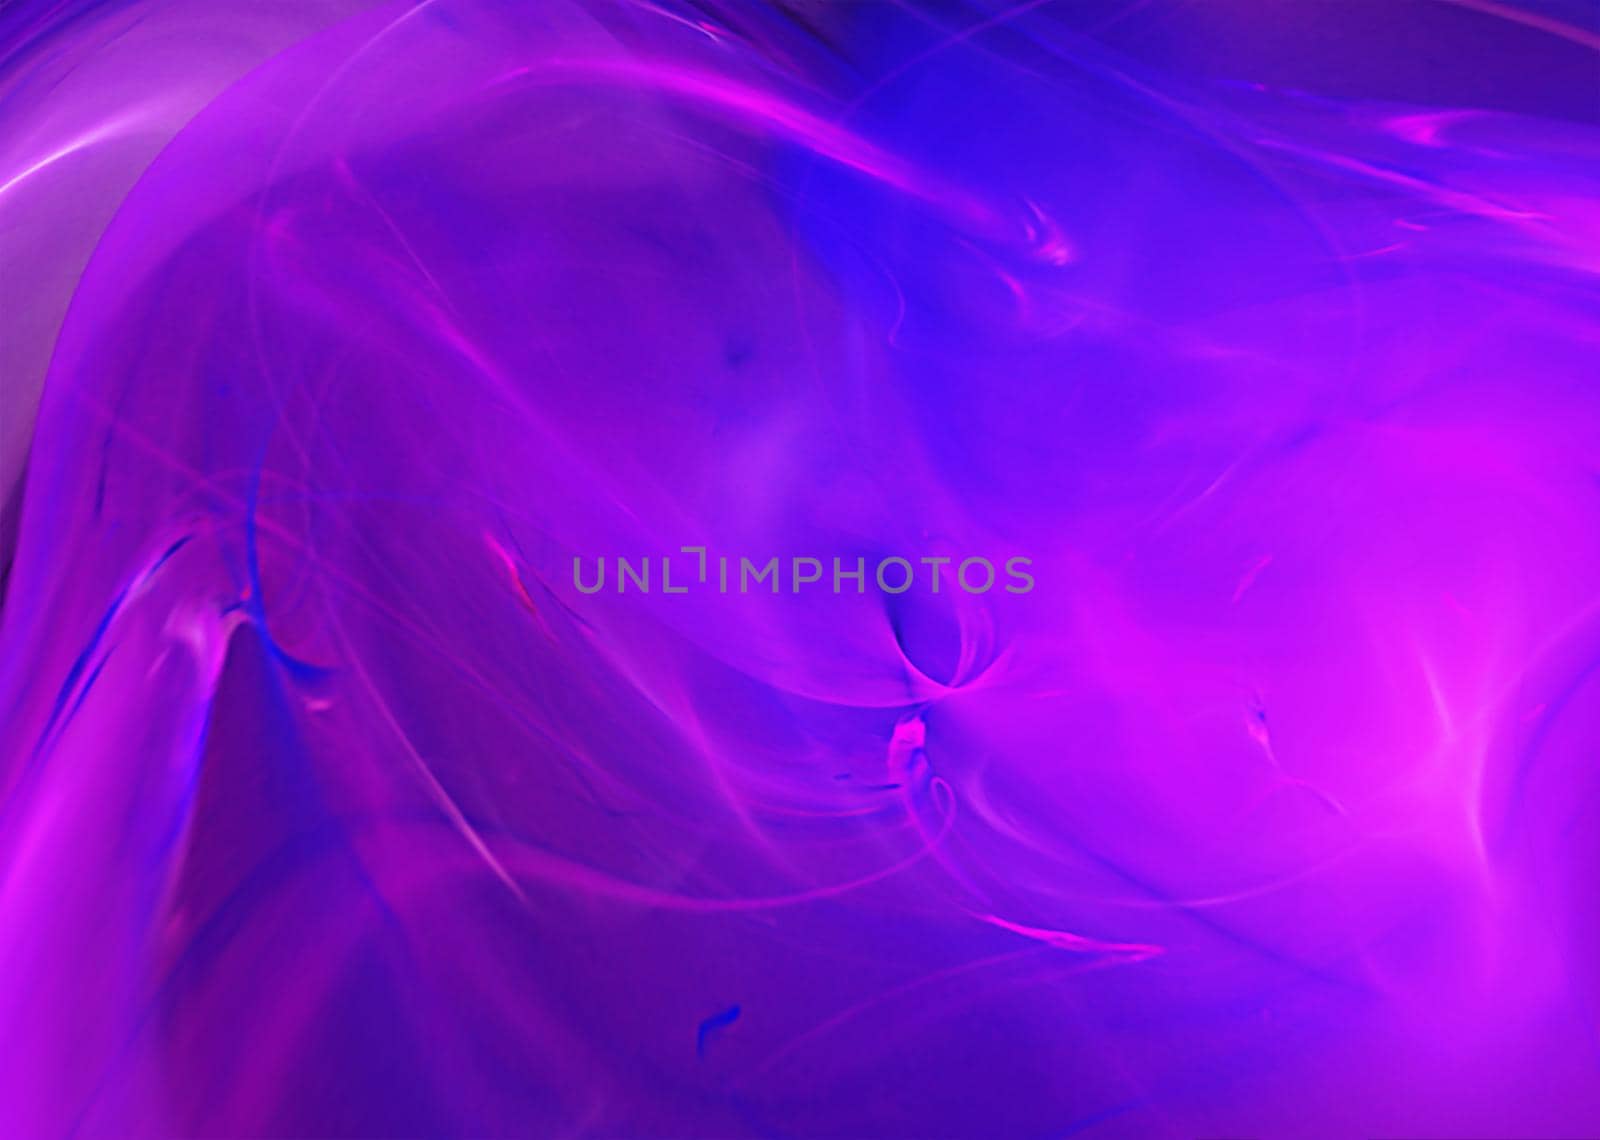 Abstract blurred background in bright colors. Colorful sleek banner template